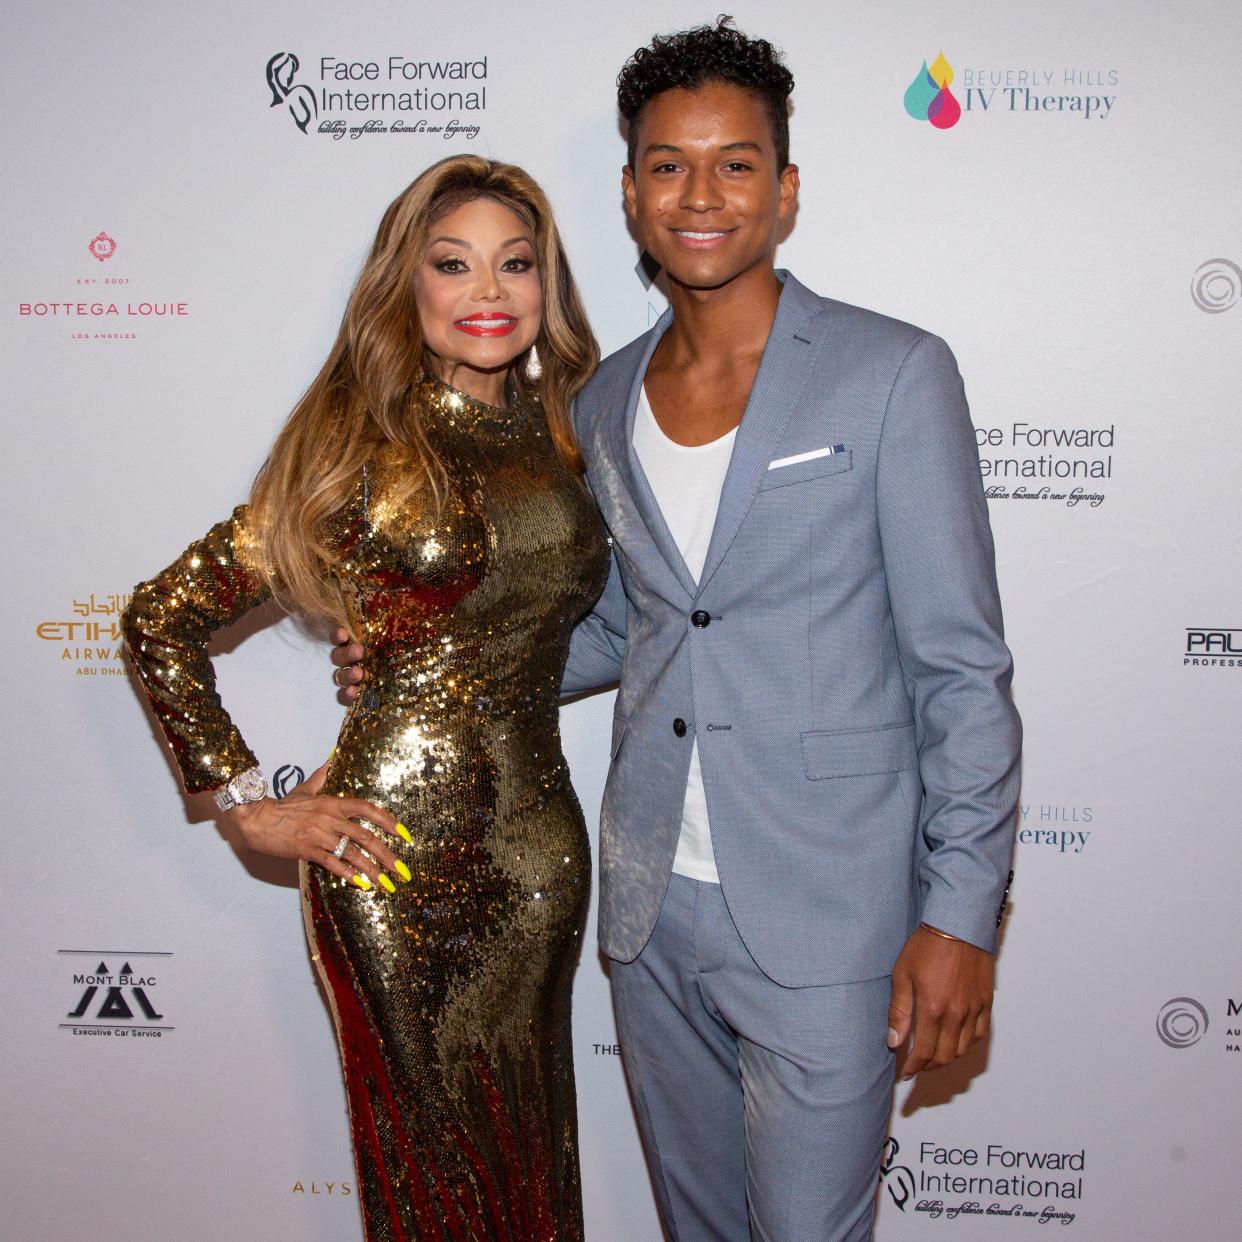 "Jaafar embodies my son," Katherine Jackson, Michael Jackson's mother, said in a previous statement. Here, he is pictured with LaToya Jackson in 2019.